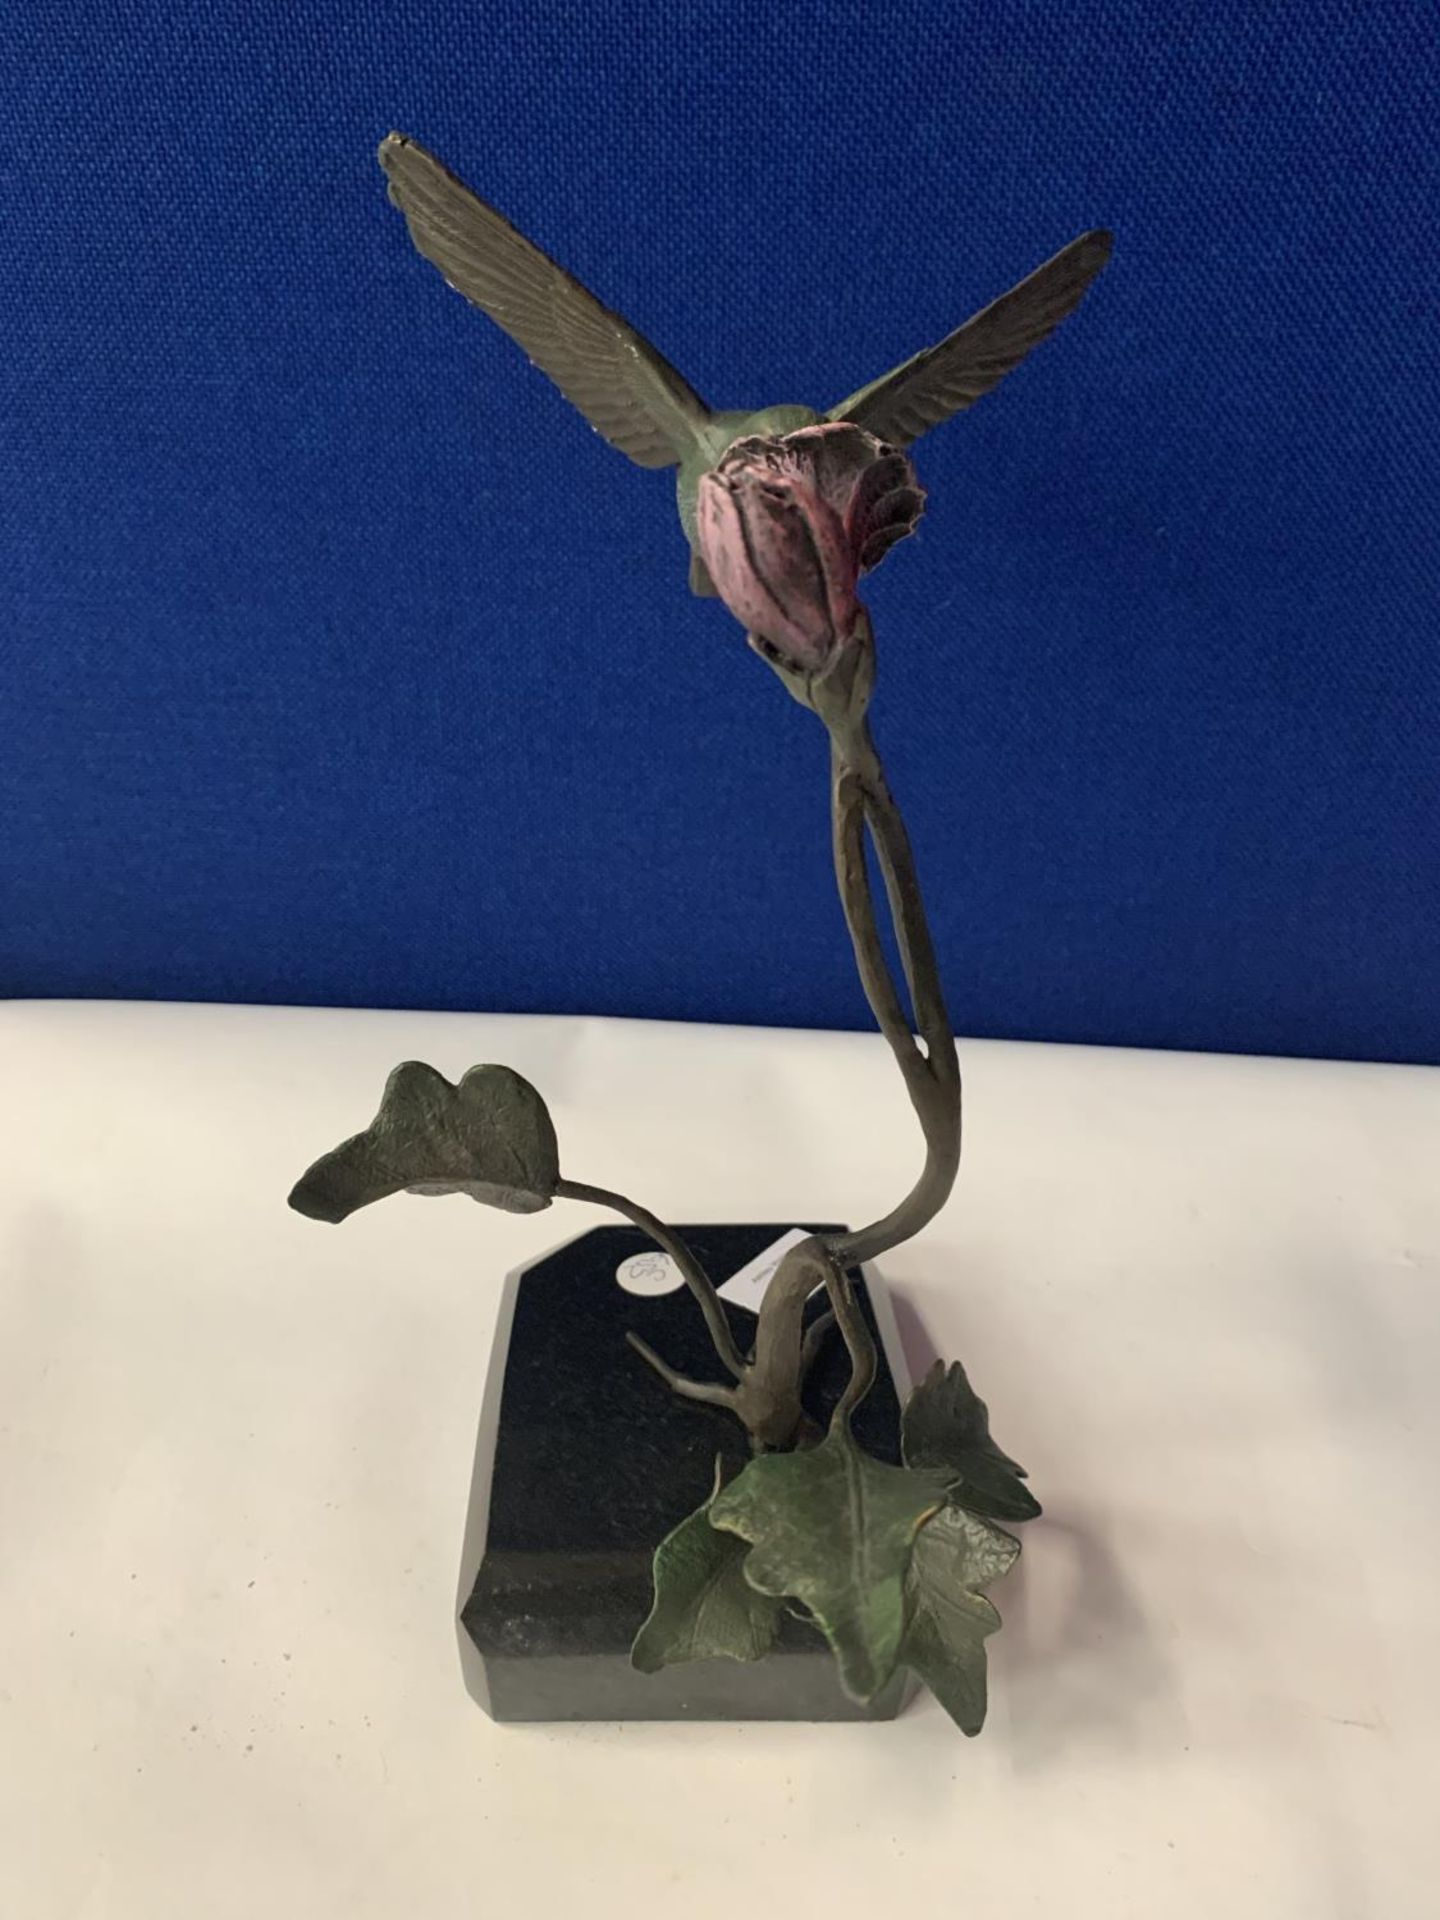 A CAST SCULPTURE OF A HUMMING BIRD ON A GRANITE BASE - Image 8 of 15